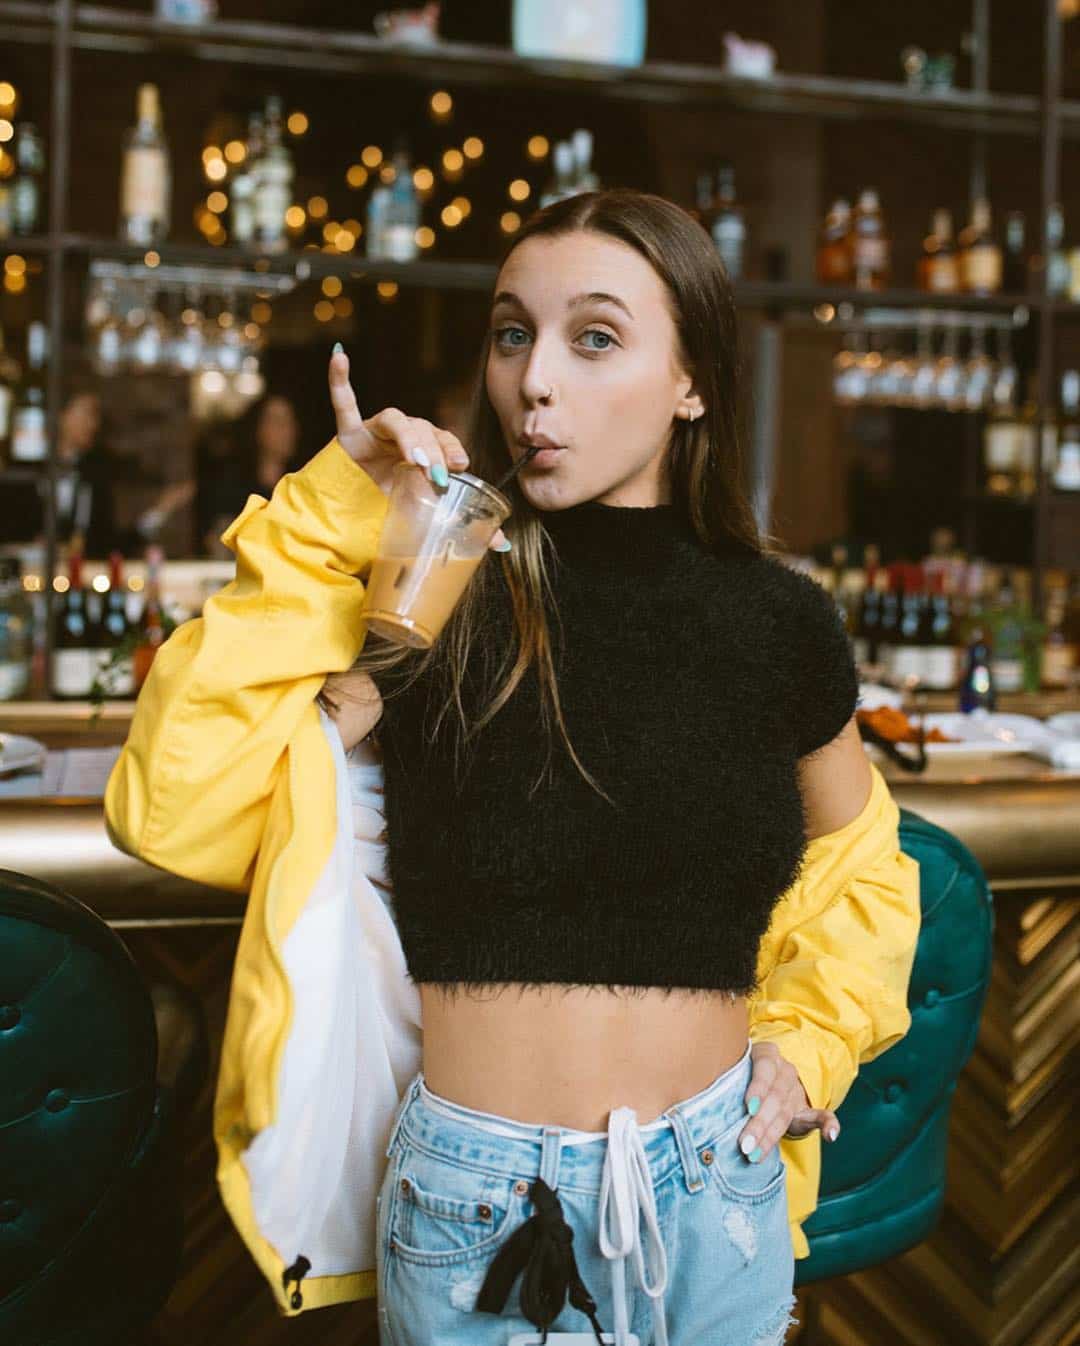 Emma Chamberlain - Biography, Profile, Facts and Career